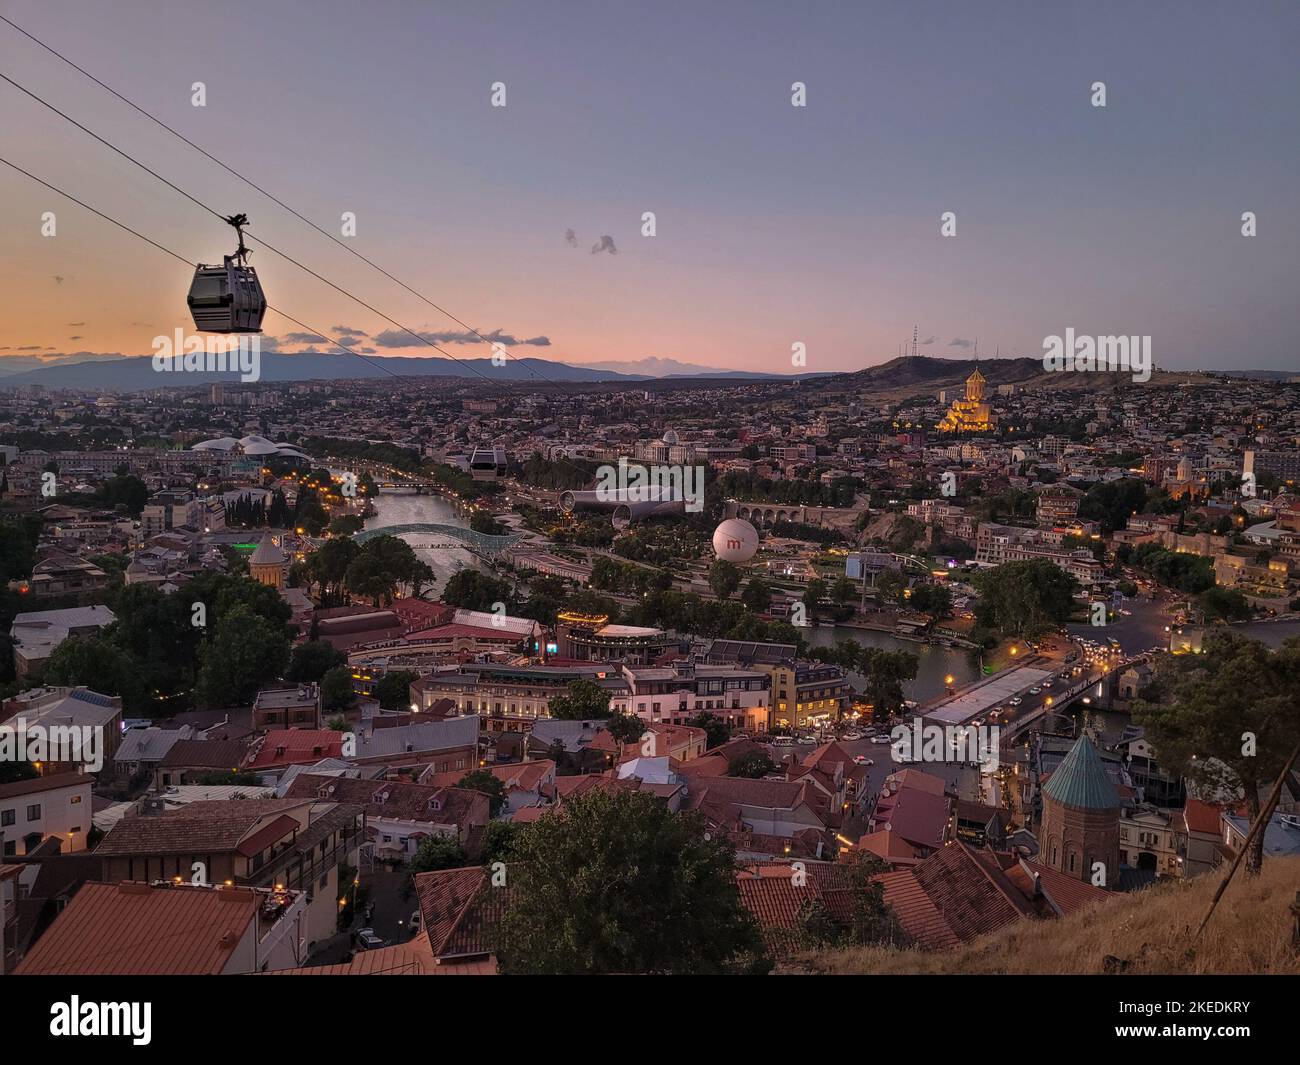 Summer sunset panorama of city of Tbilisi Tiflis, capital of Georgia with Aerial Tramway cable car above streets of Old Tbilisi in foreground, Mtkvari Stock Photo